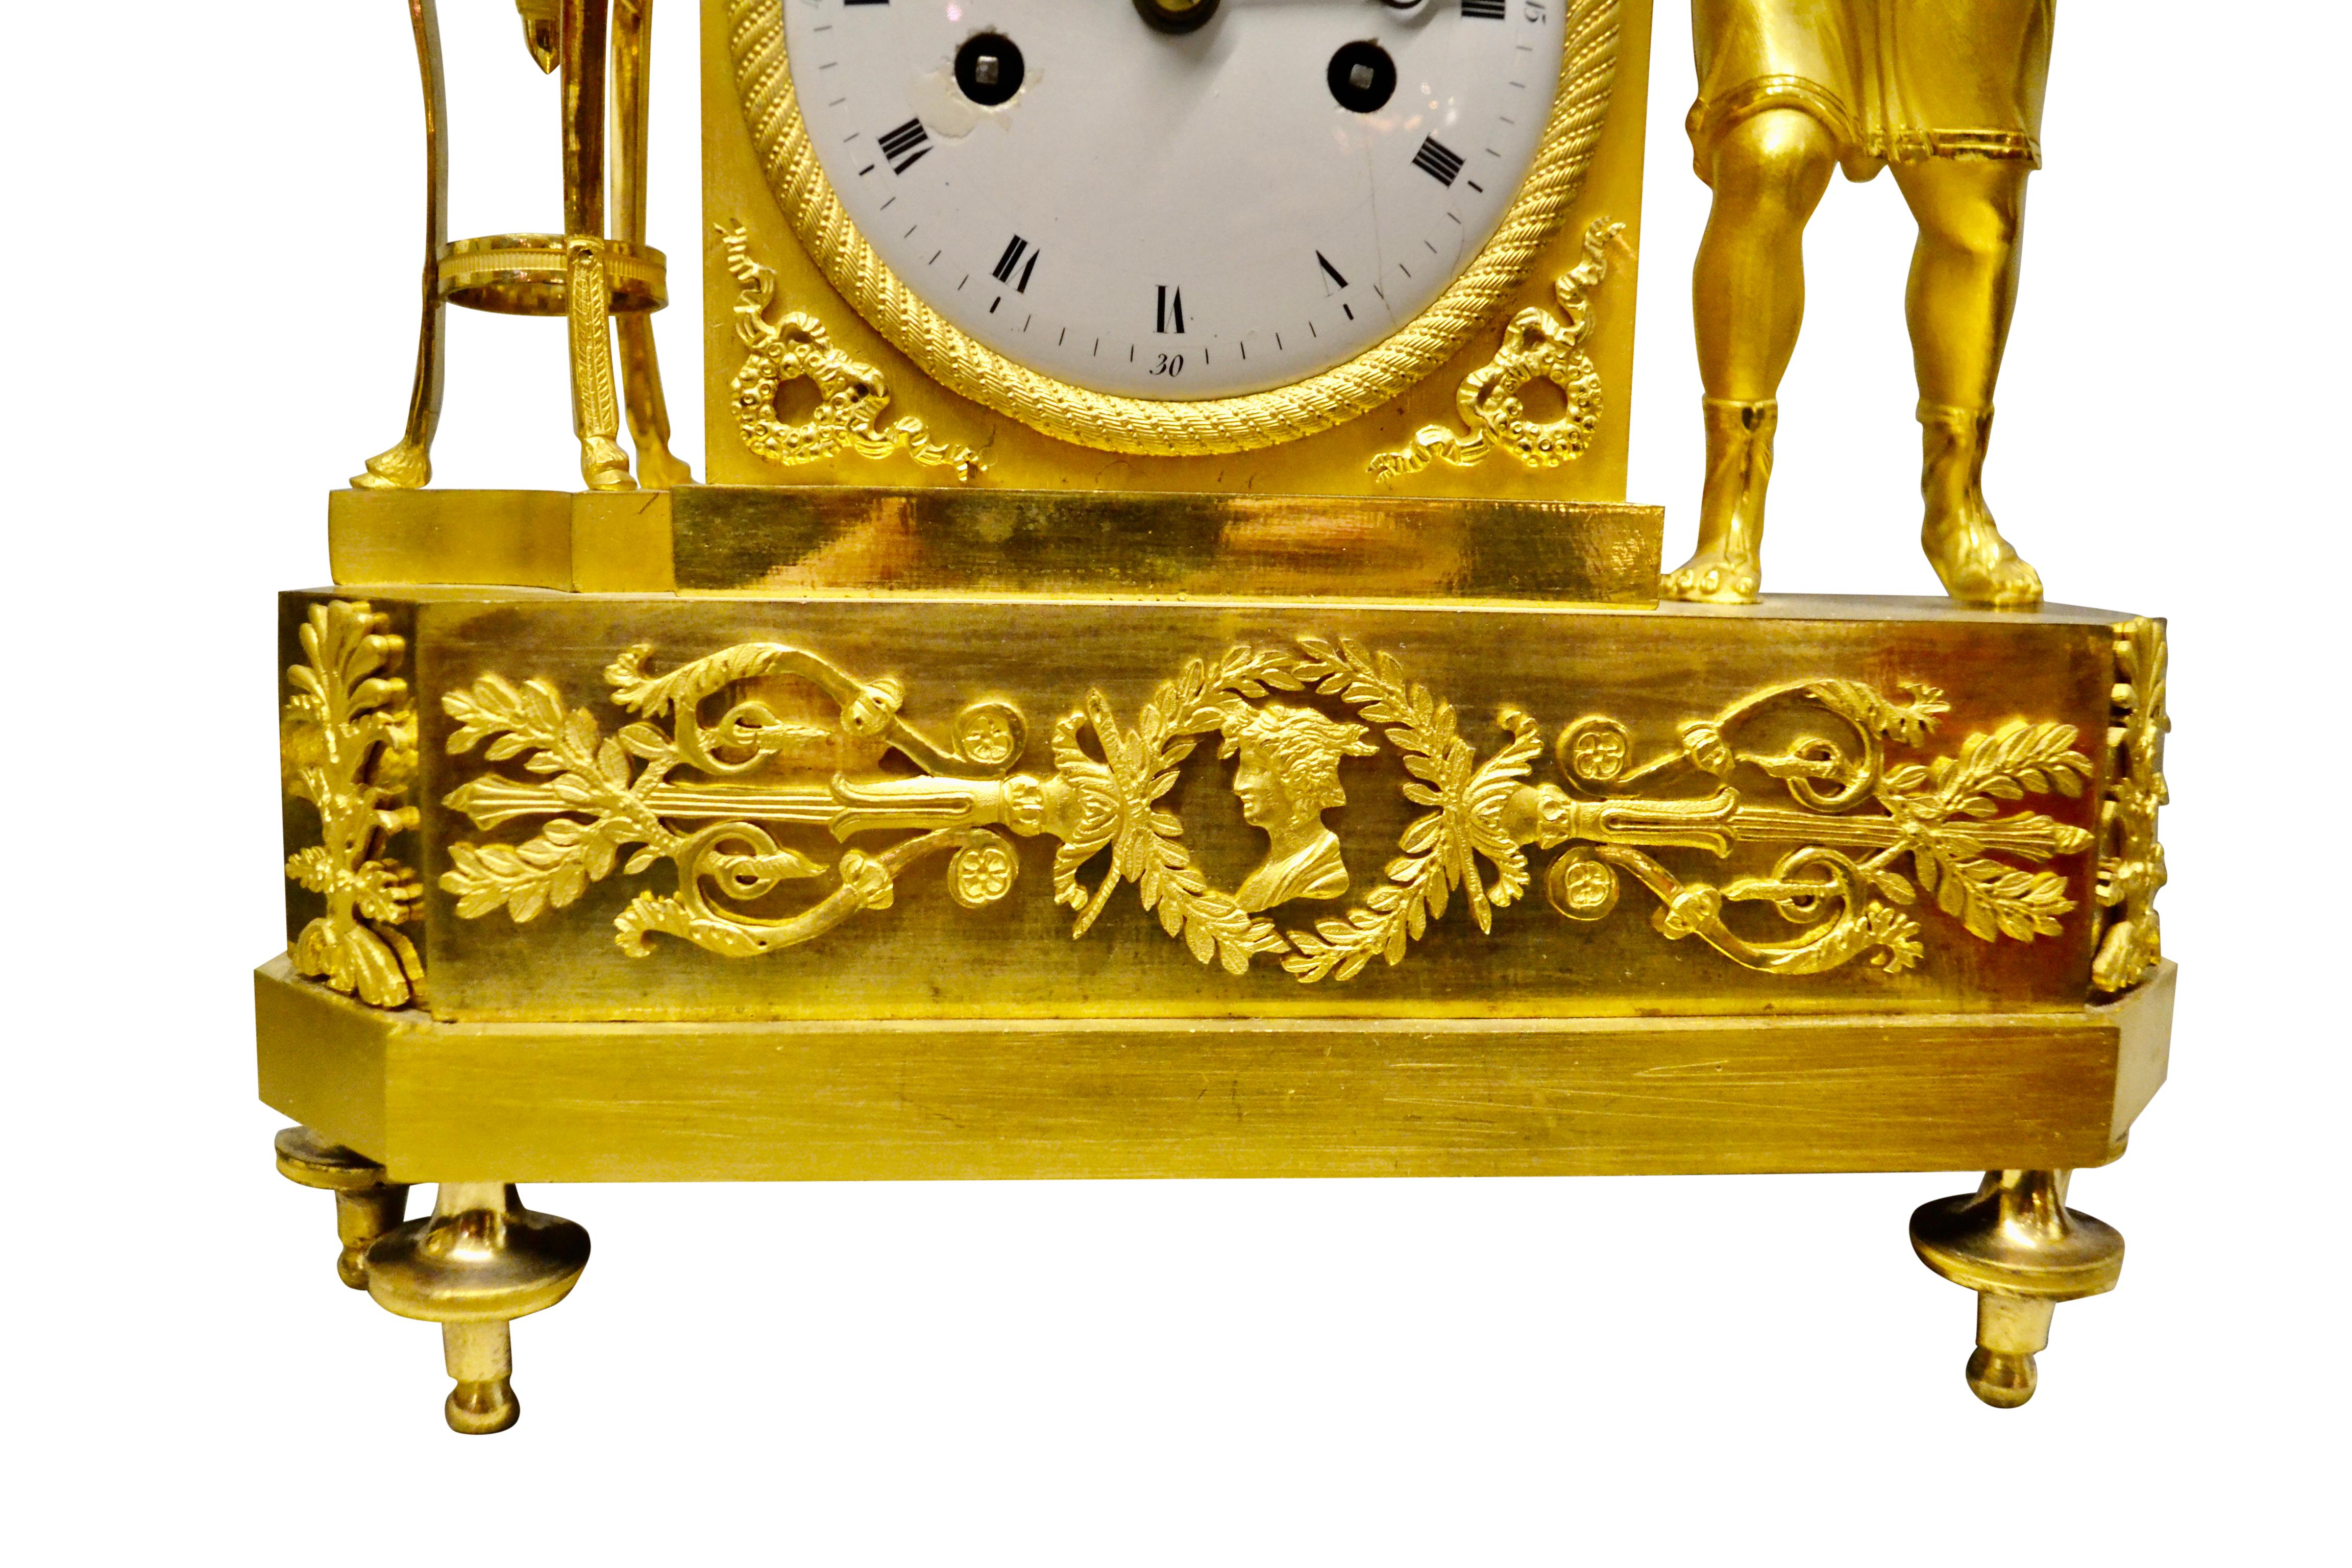 19th Century Period French Empire Mantle Clock Depicting a Winged Cupid Playing a Lute For Sale